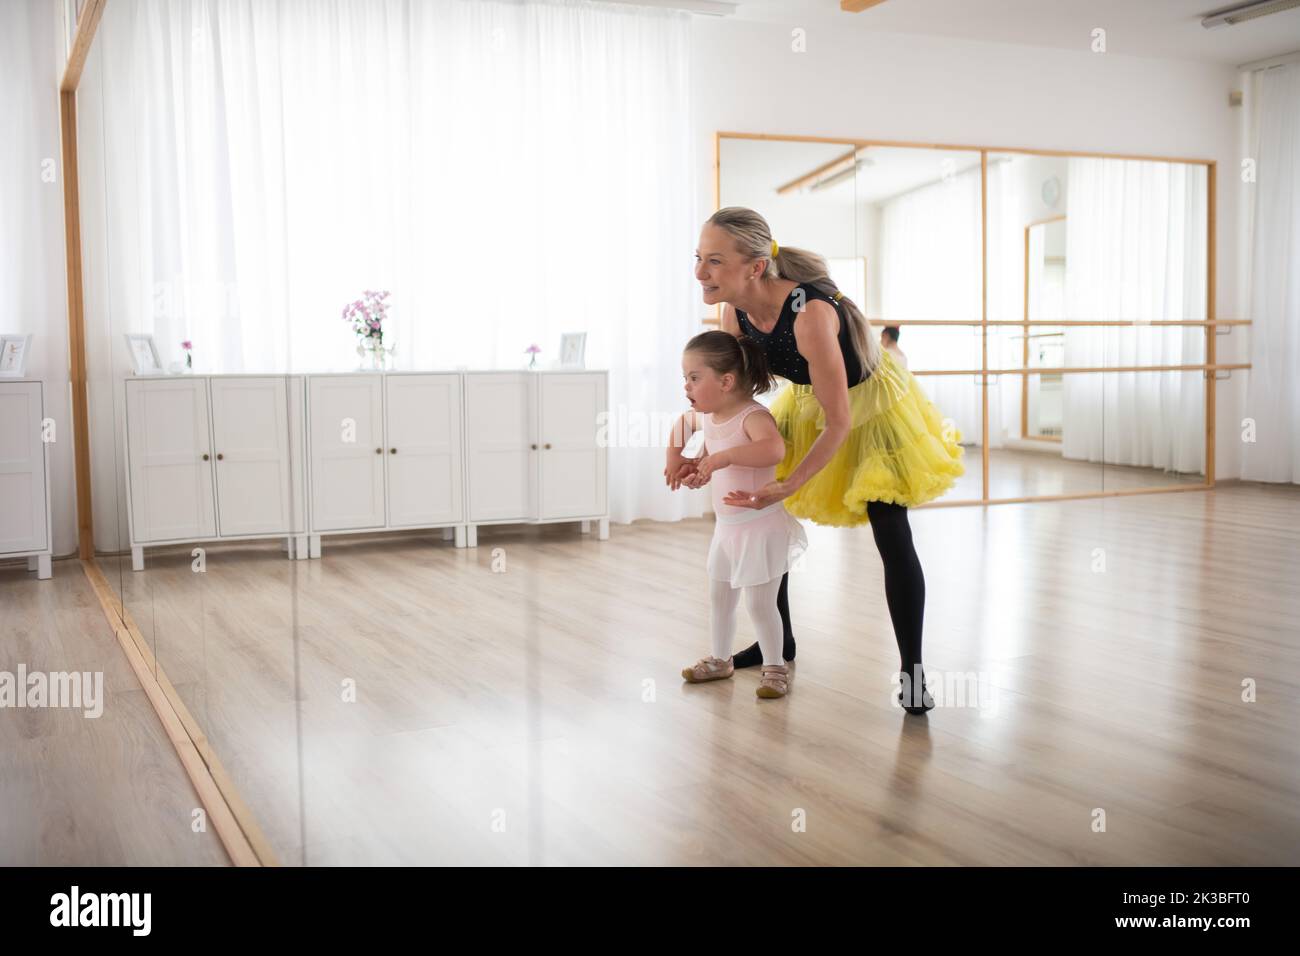 Little girl with down syndrome learning ballet with dance lecteur in ballet studio. Stock Photo